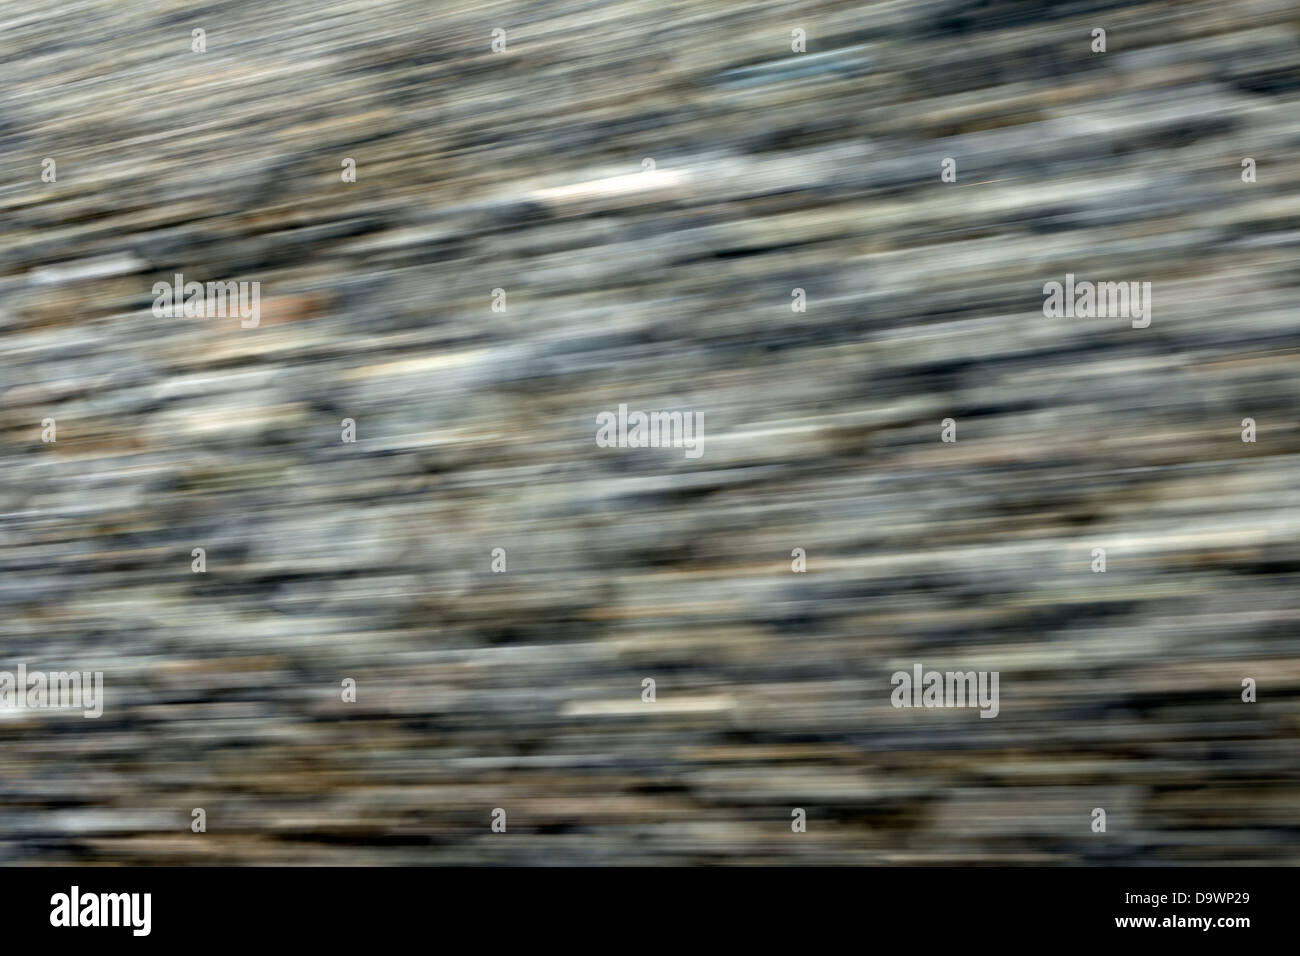 abstract, backdrop, background, blur, blurry, desktop, grays, image, line, tone, wallpaper, drive, fast, motion, movement, movin Stock Photo